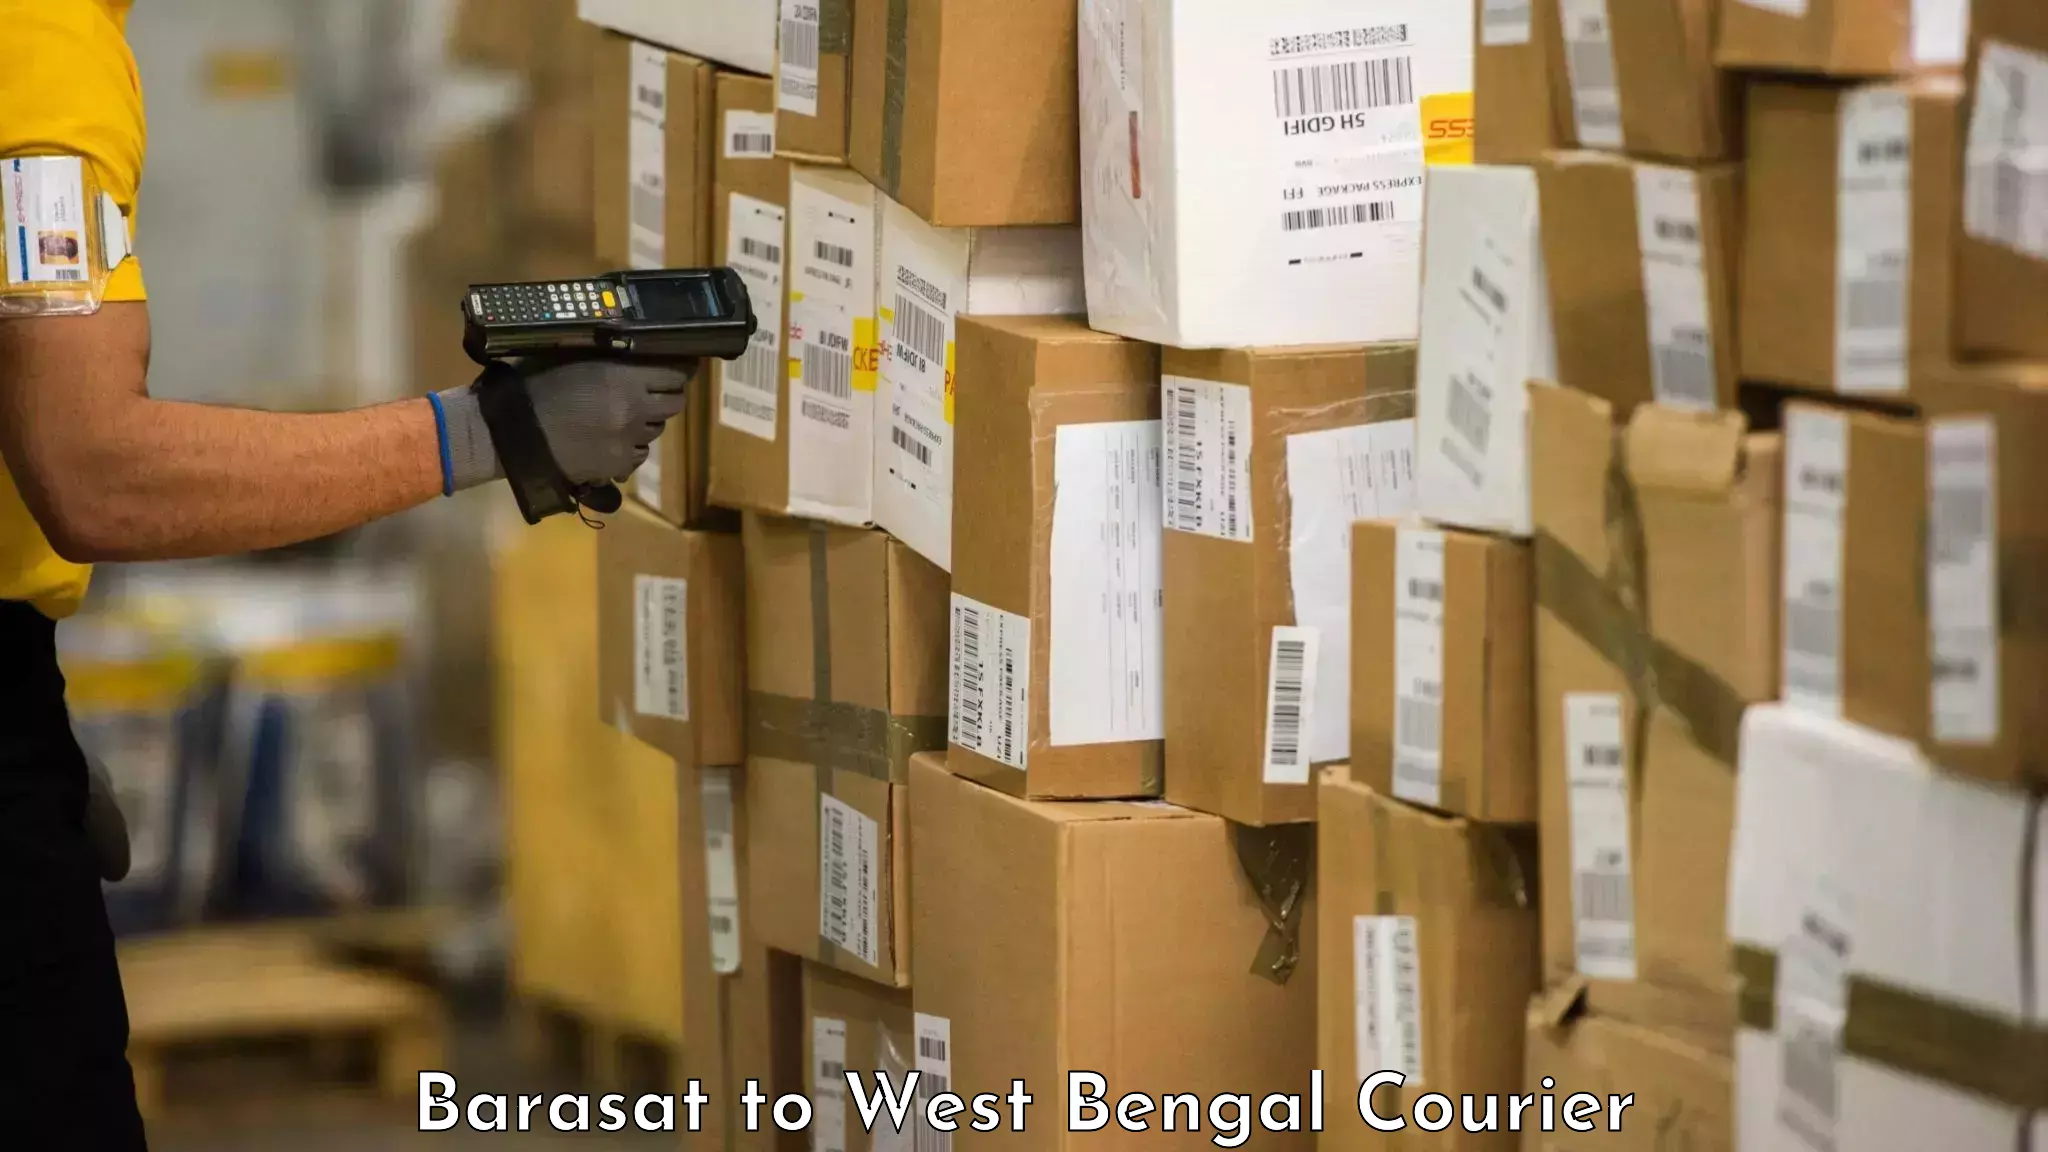 Luggage shipment specialists Barasat to West Bengal